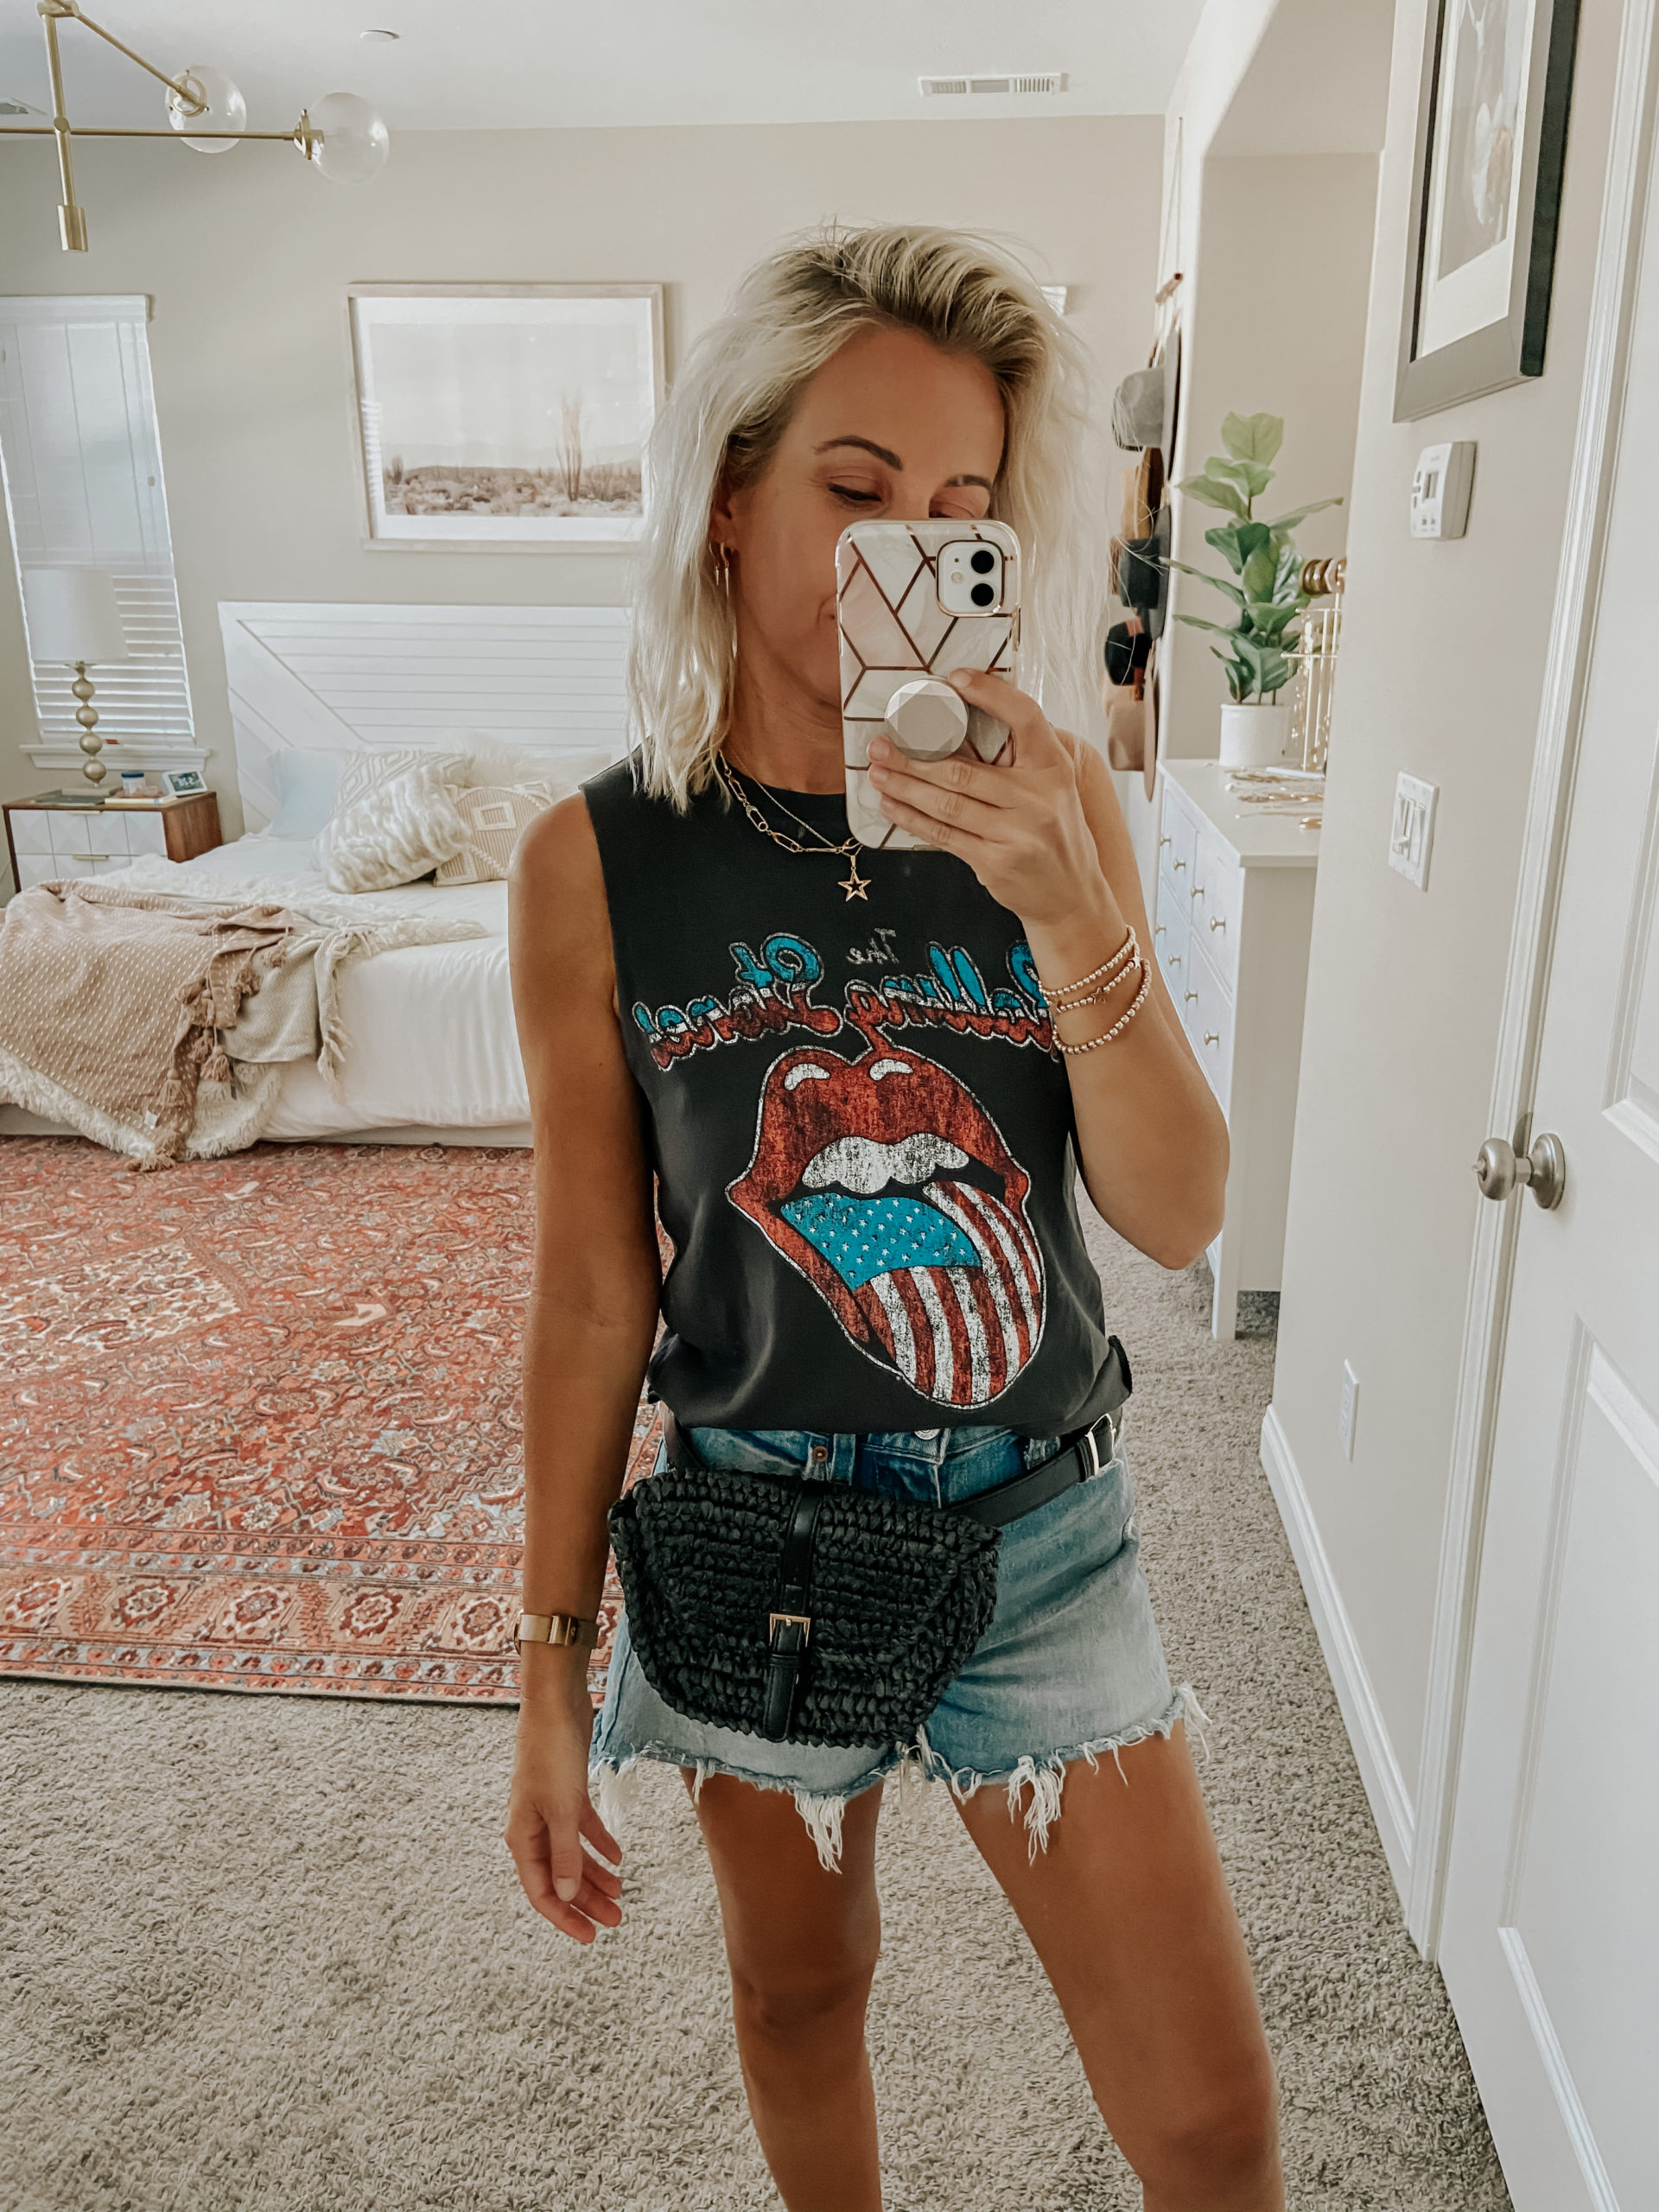 LAST MINUTE 4TH OF JULY OUTFIT IDEAS- Jaclyn De Leon Style+ sharing a few different outfit ideas for the 4th of July and Americana style holidays